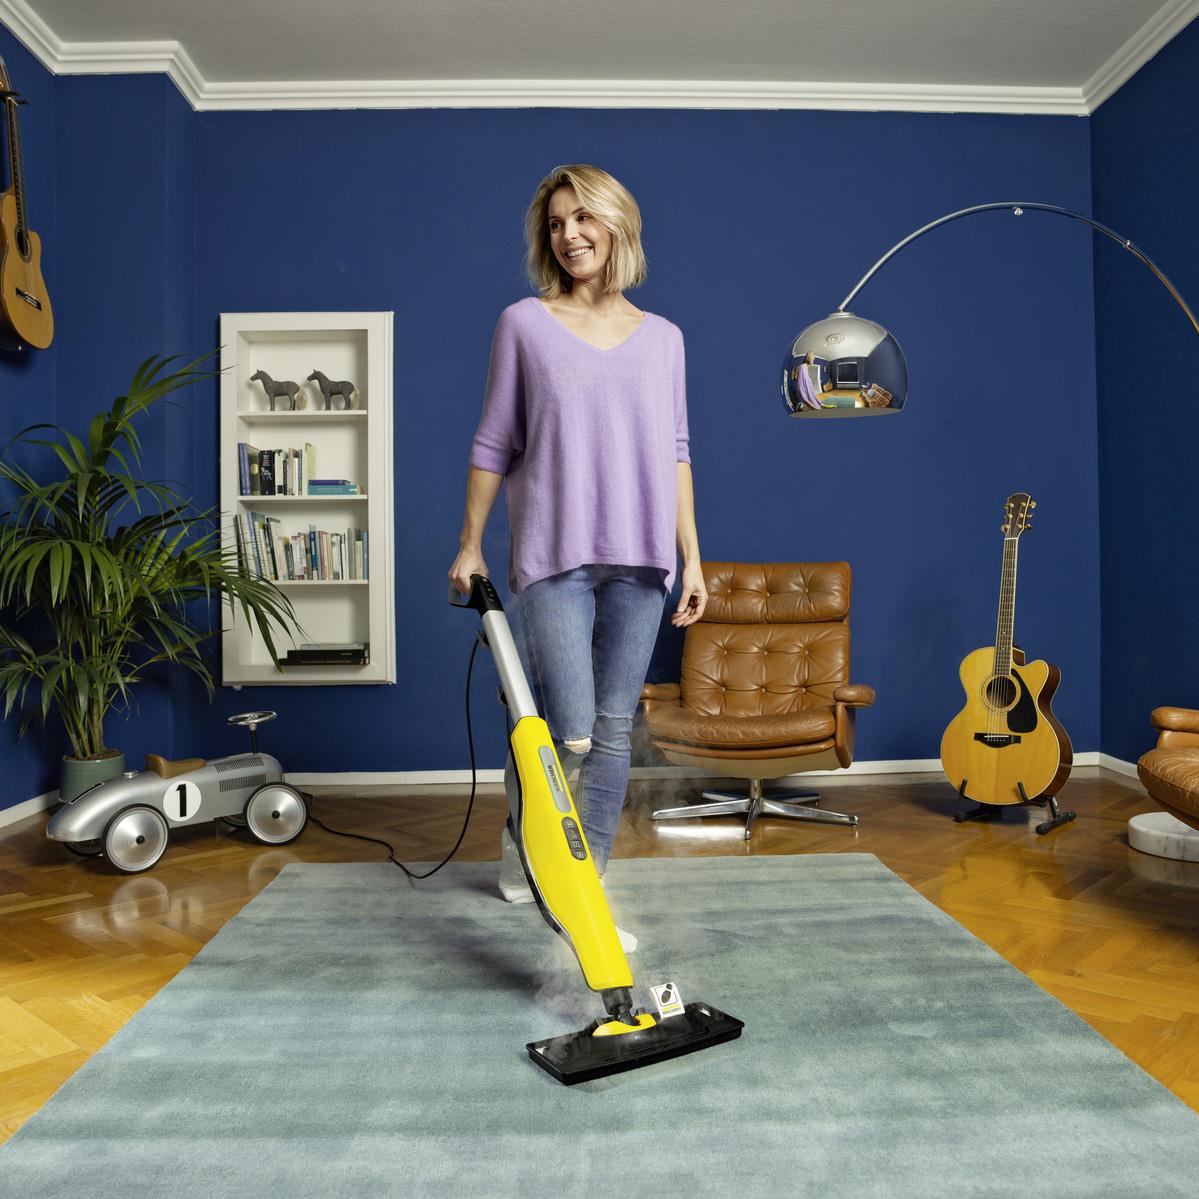 Kärcher SC3 Portable Steam Cleaner, Floors, Grout and Tile cleaner